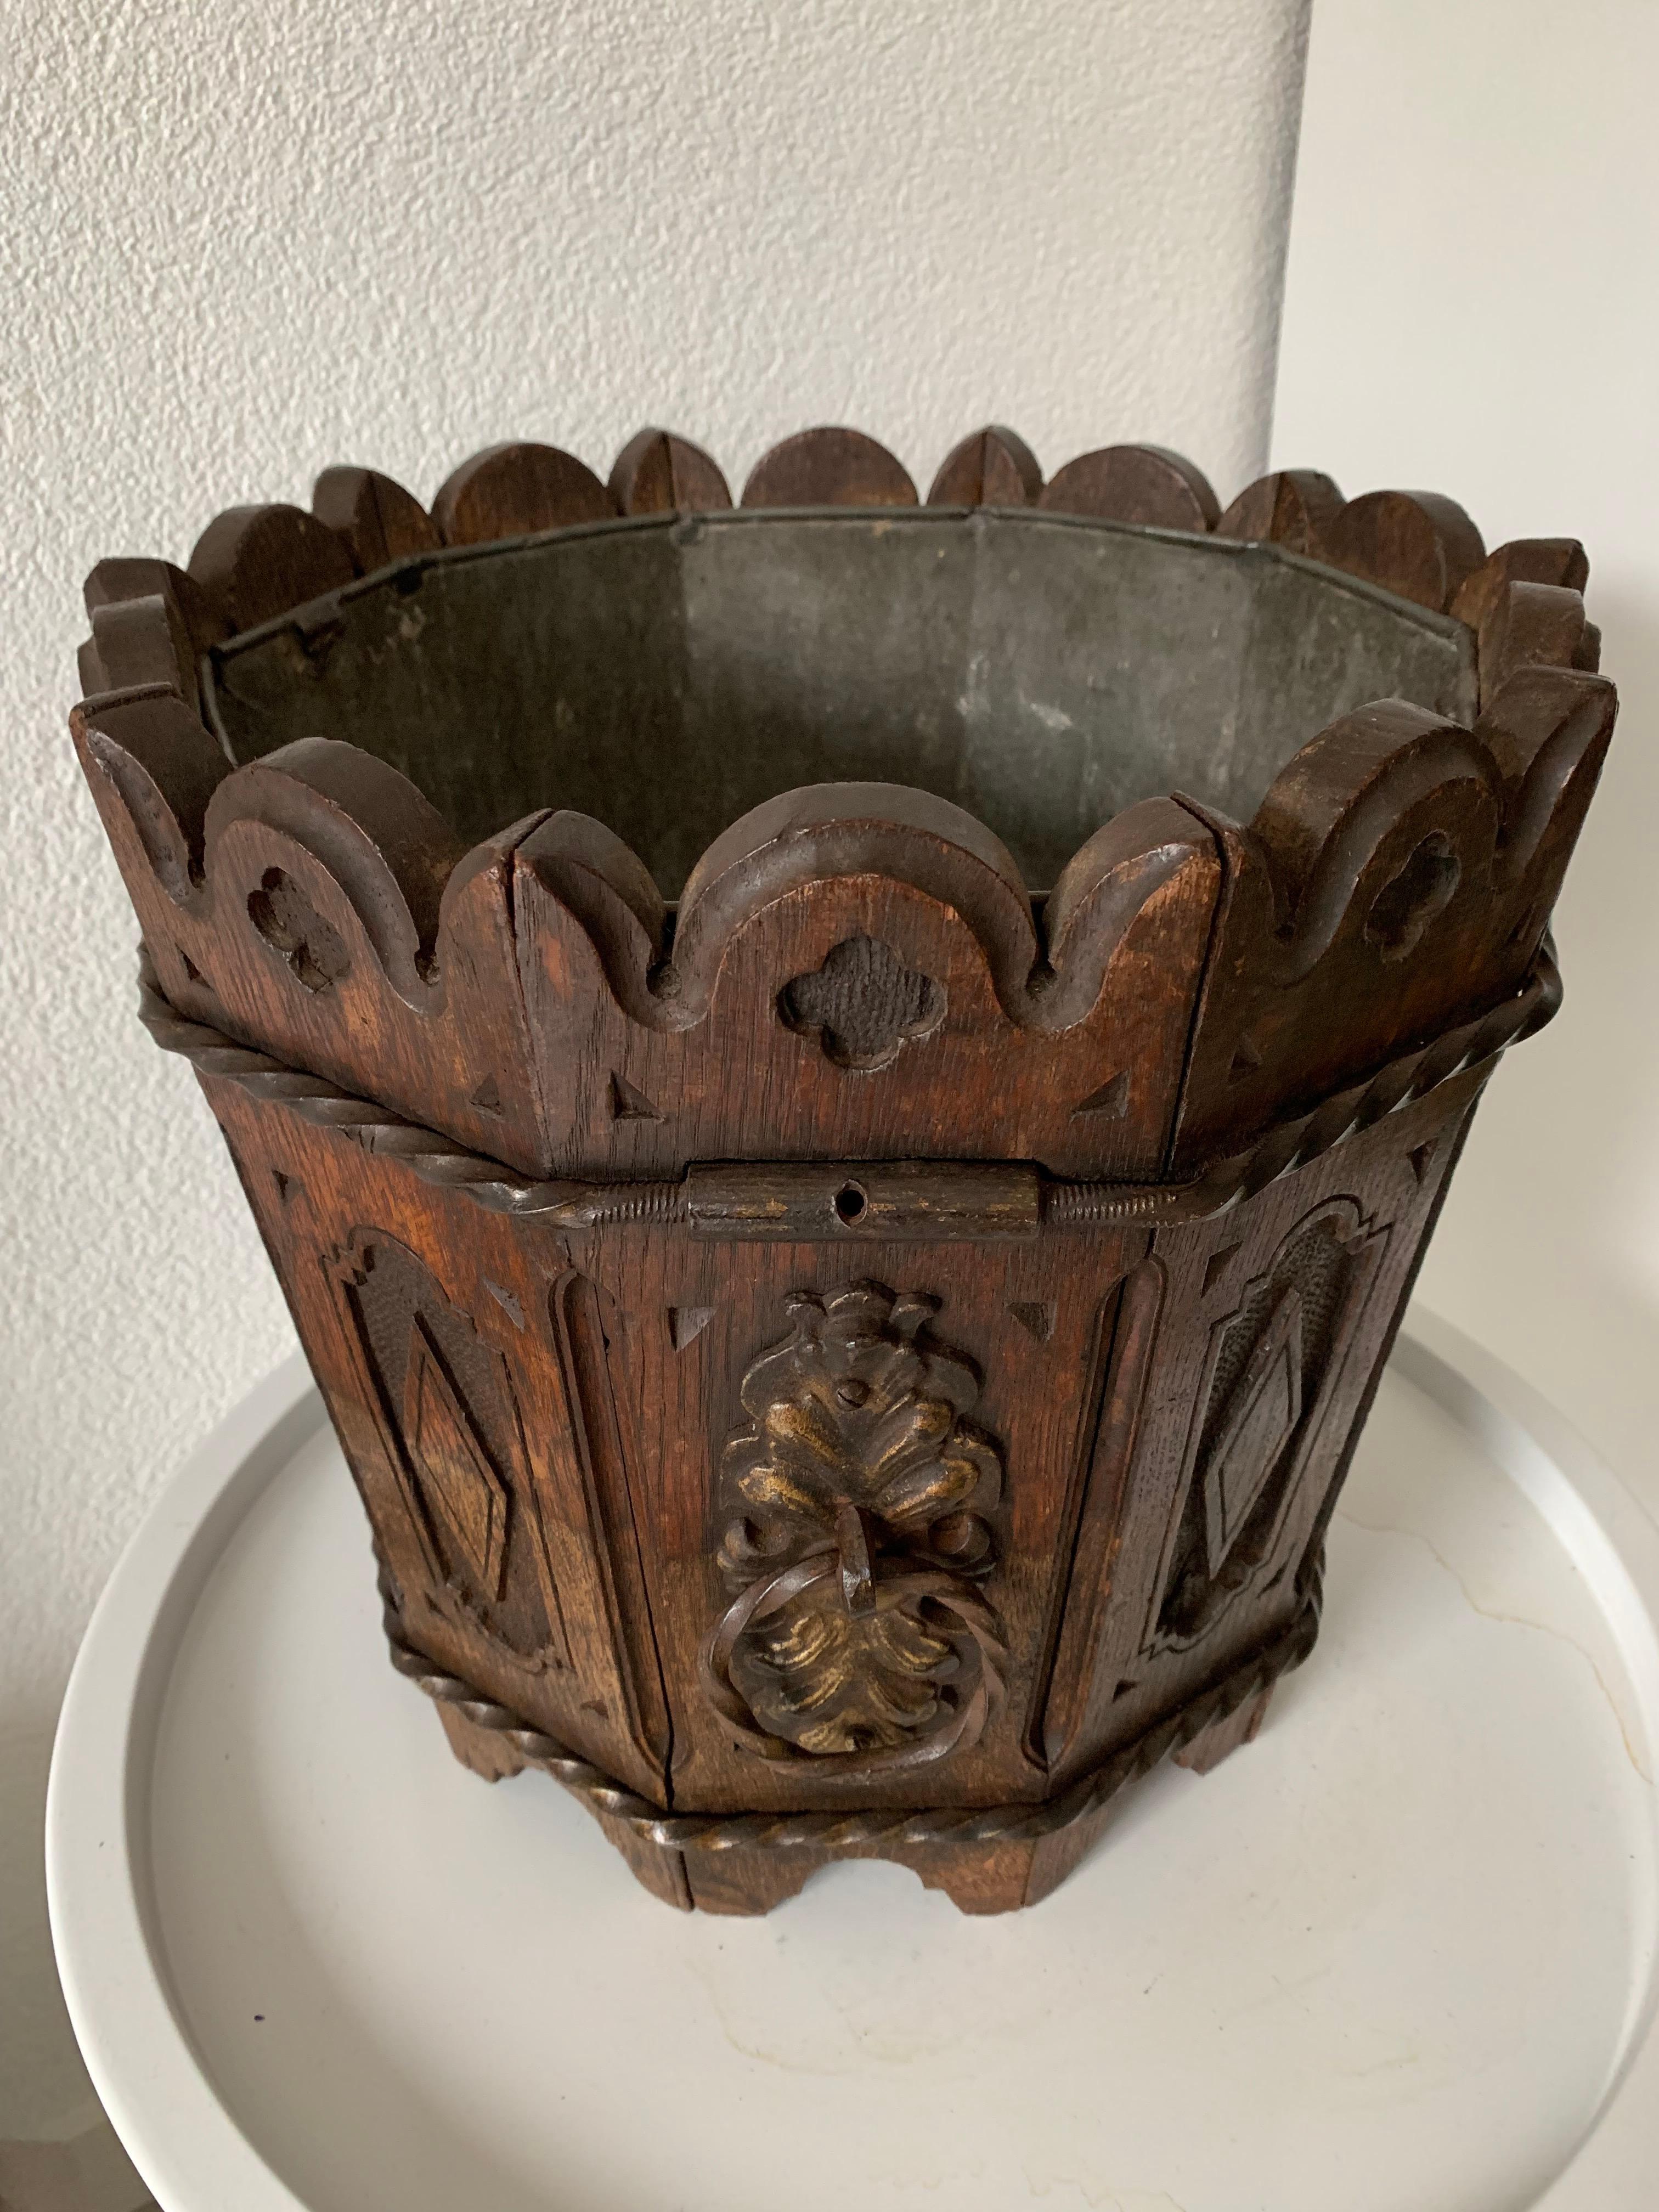 Early 1900s, hand carved planter with hand forged decorations and the original zinc liner.

If you like rare and stylish antiques then you will love this handcrafted, decagonal Gothic jardinière. The wonderful look and feel of this Gothic style